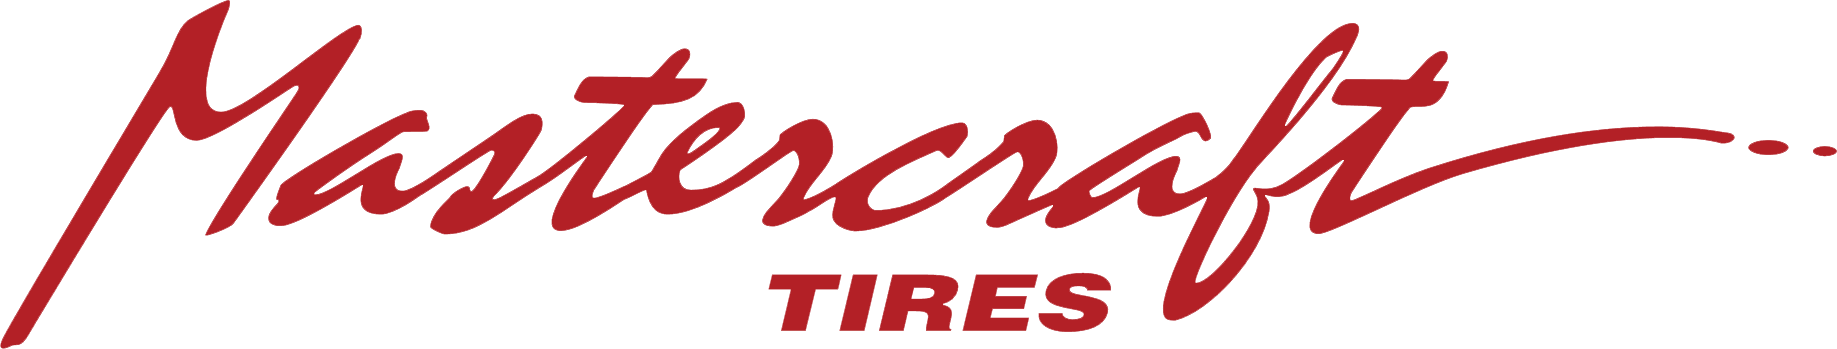 a red and black logo with the words mississippi tires.